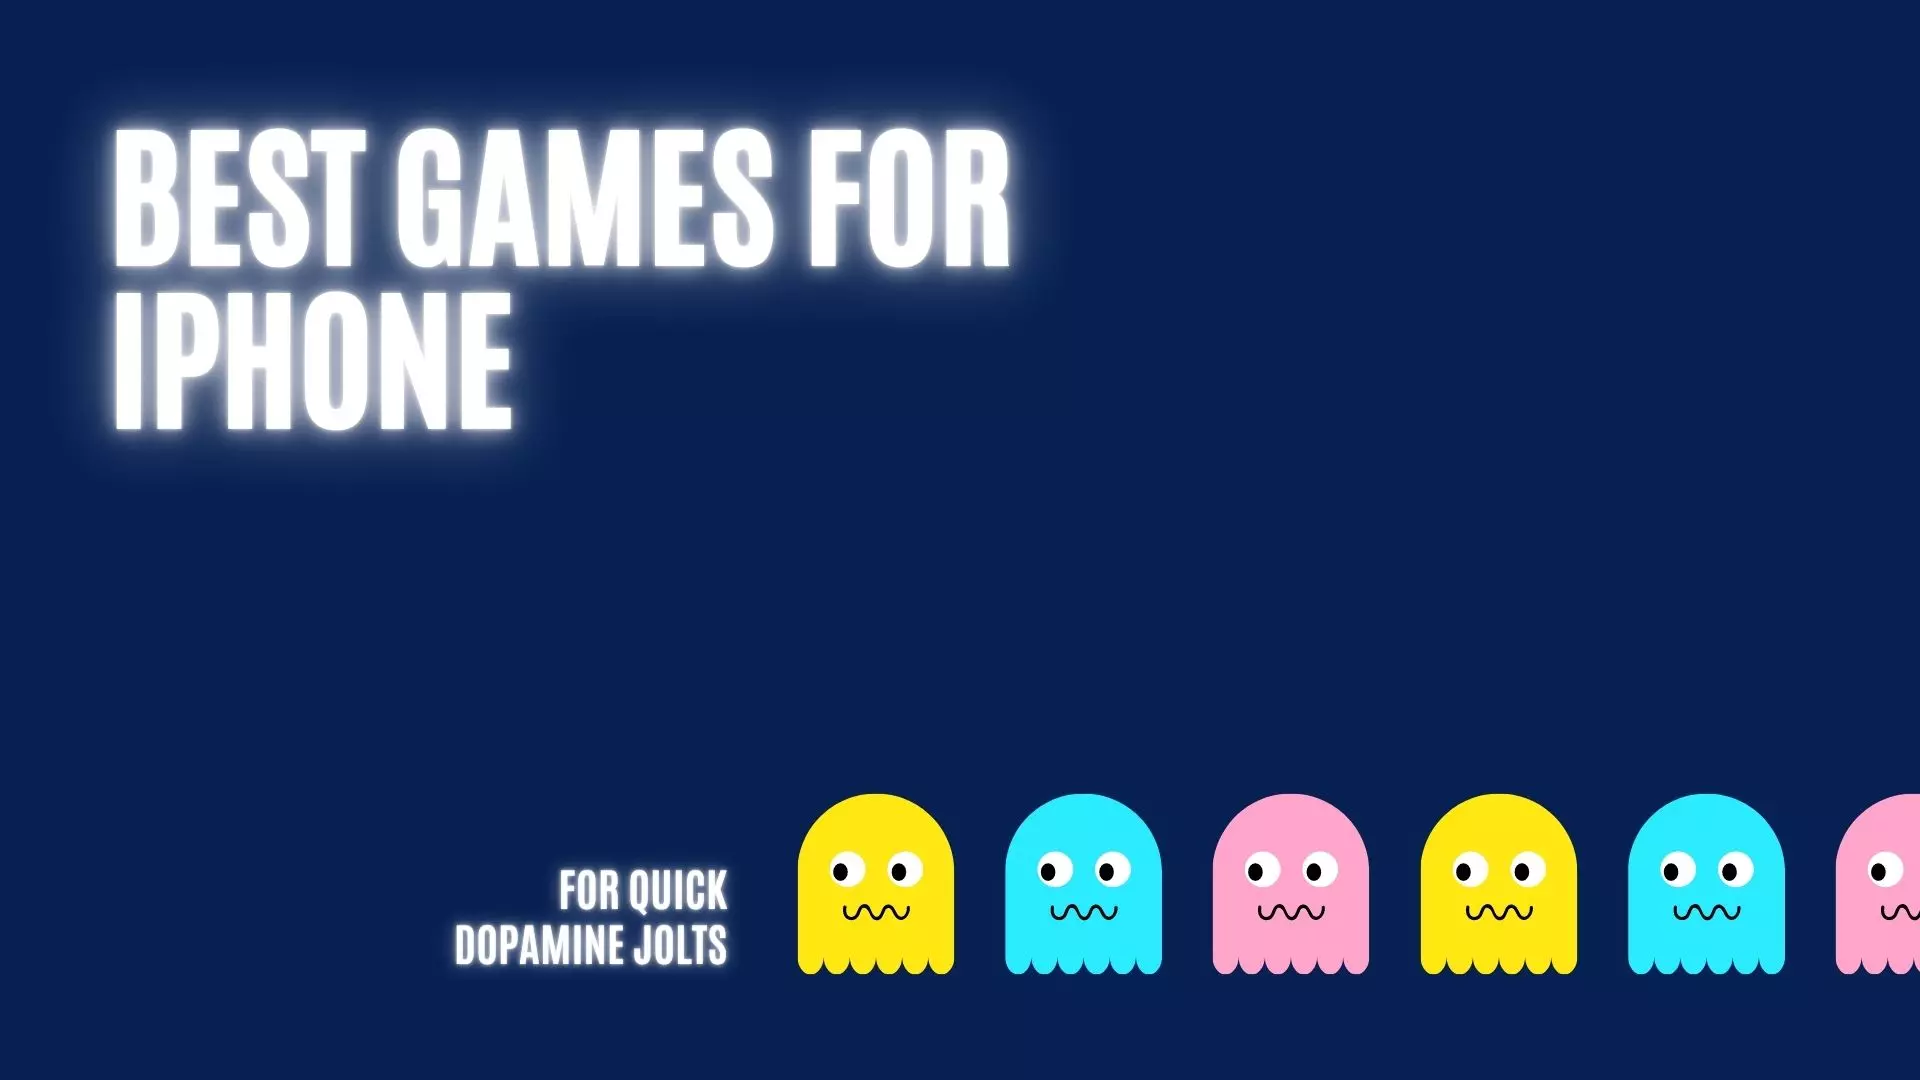 What Are The Most Fun Games For iPhone